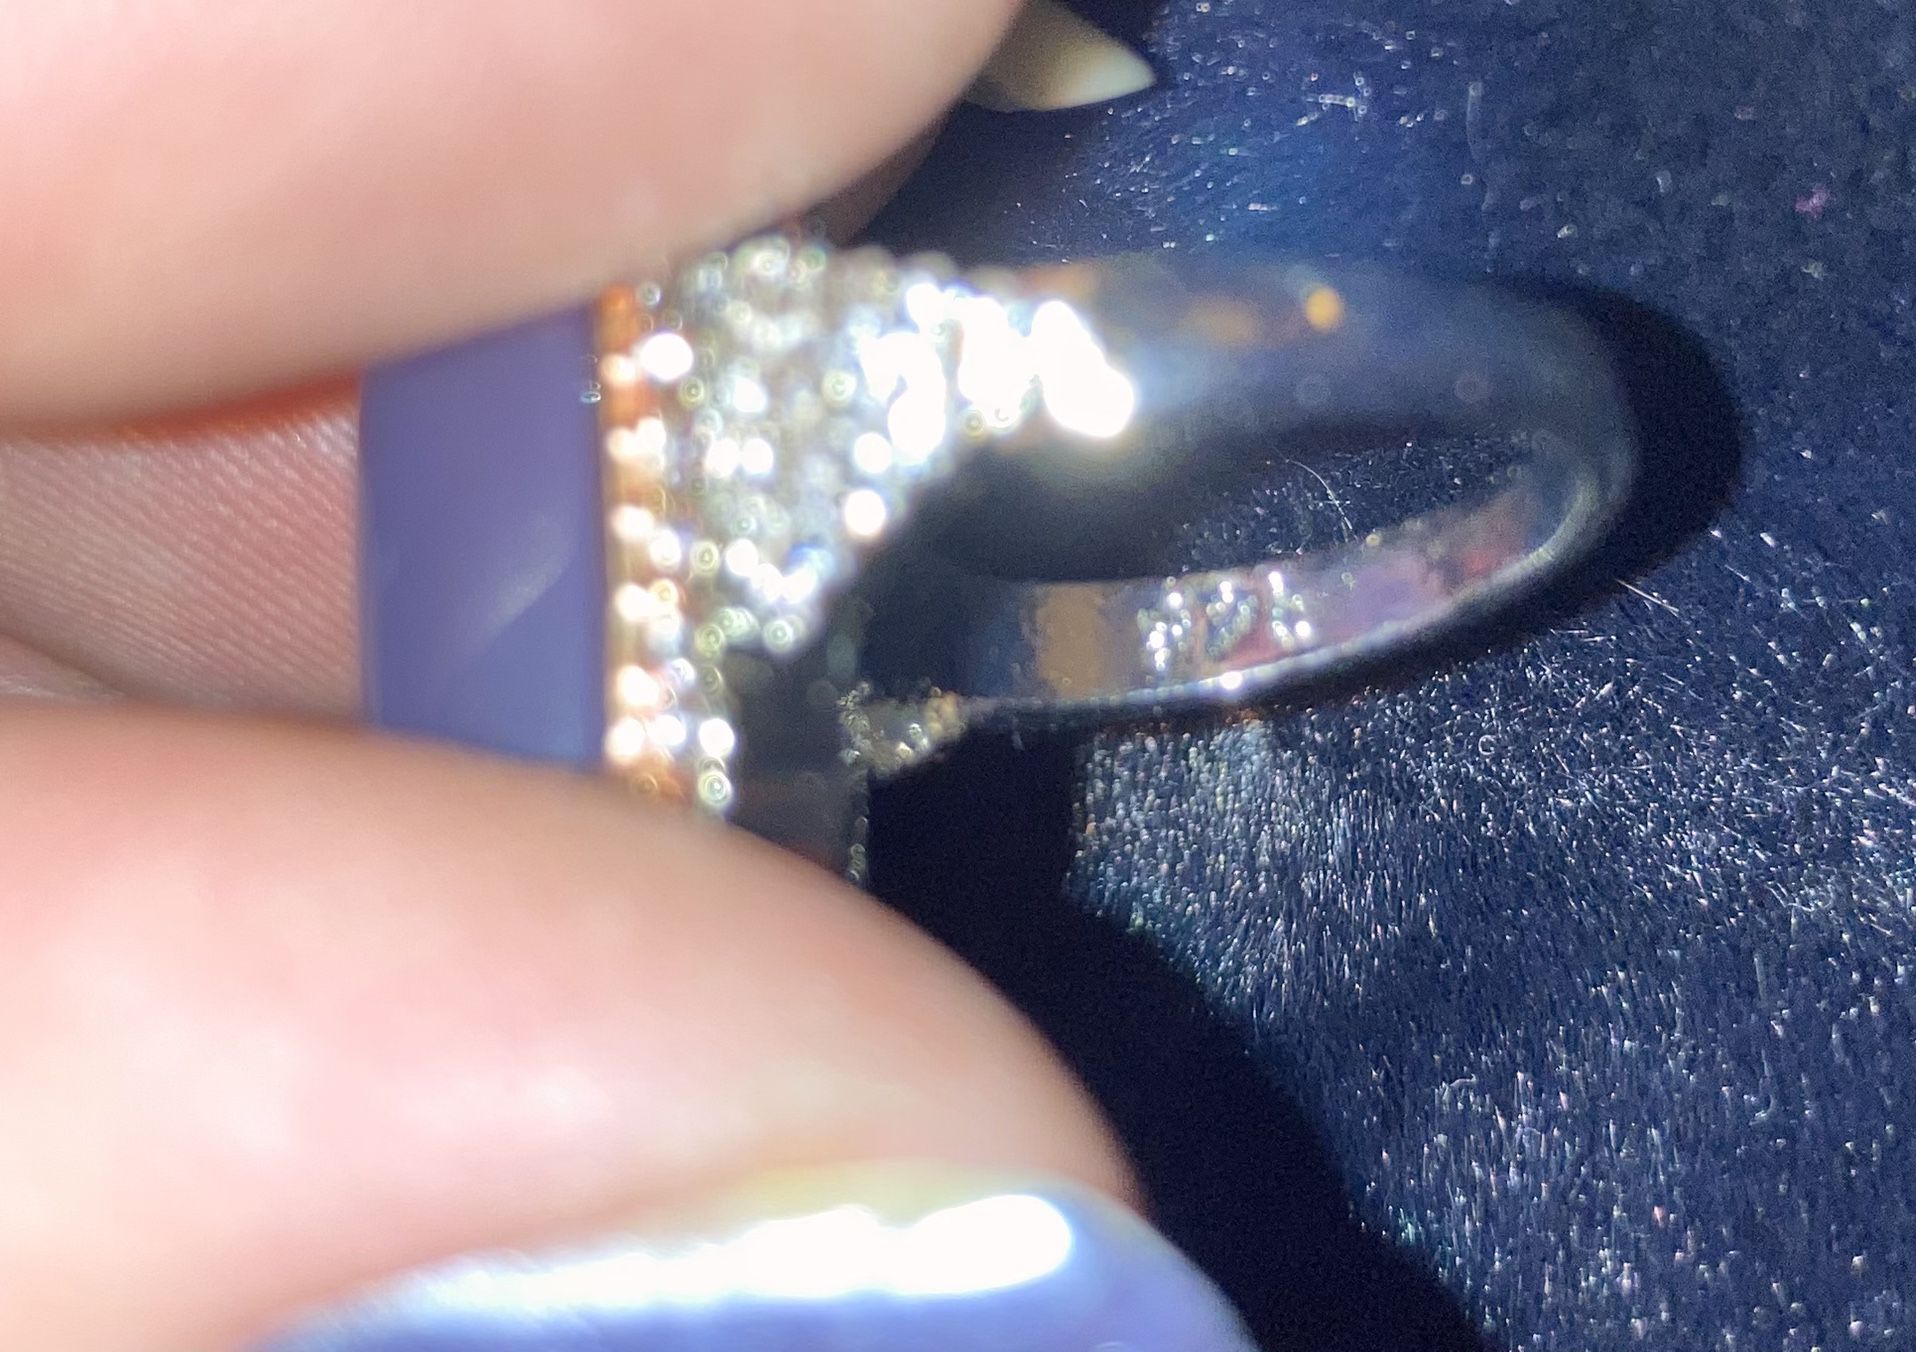 Ring Size 5